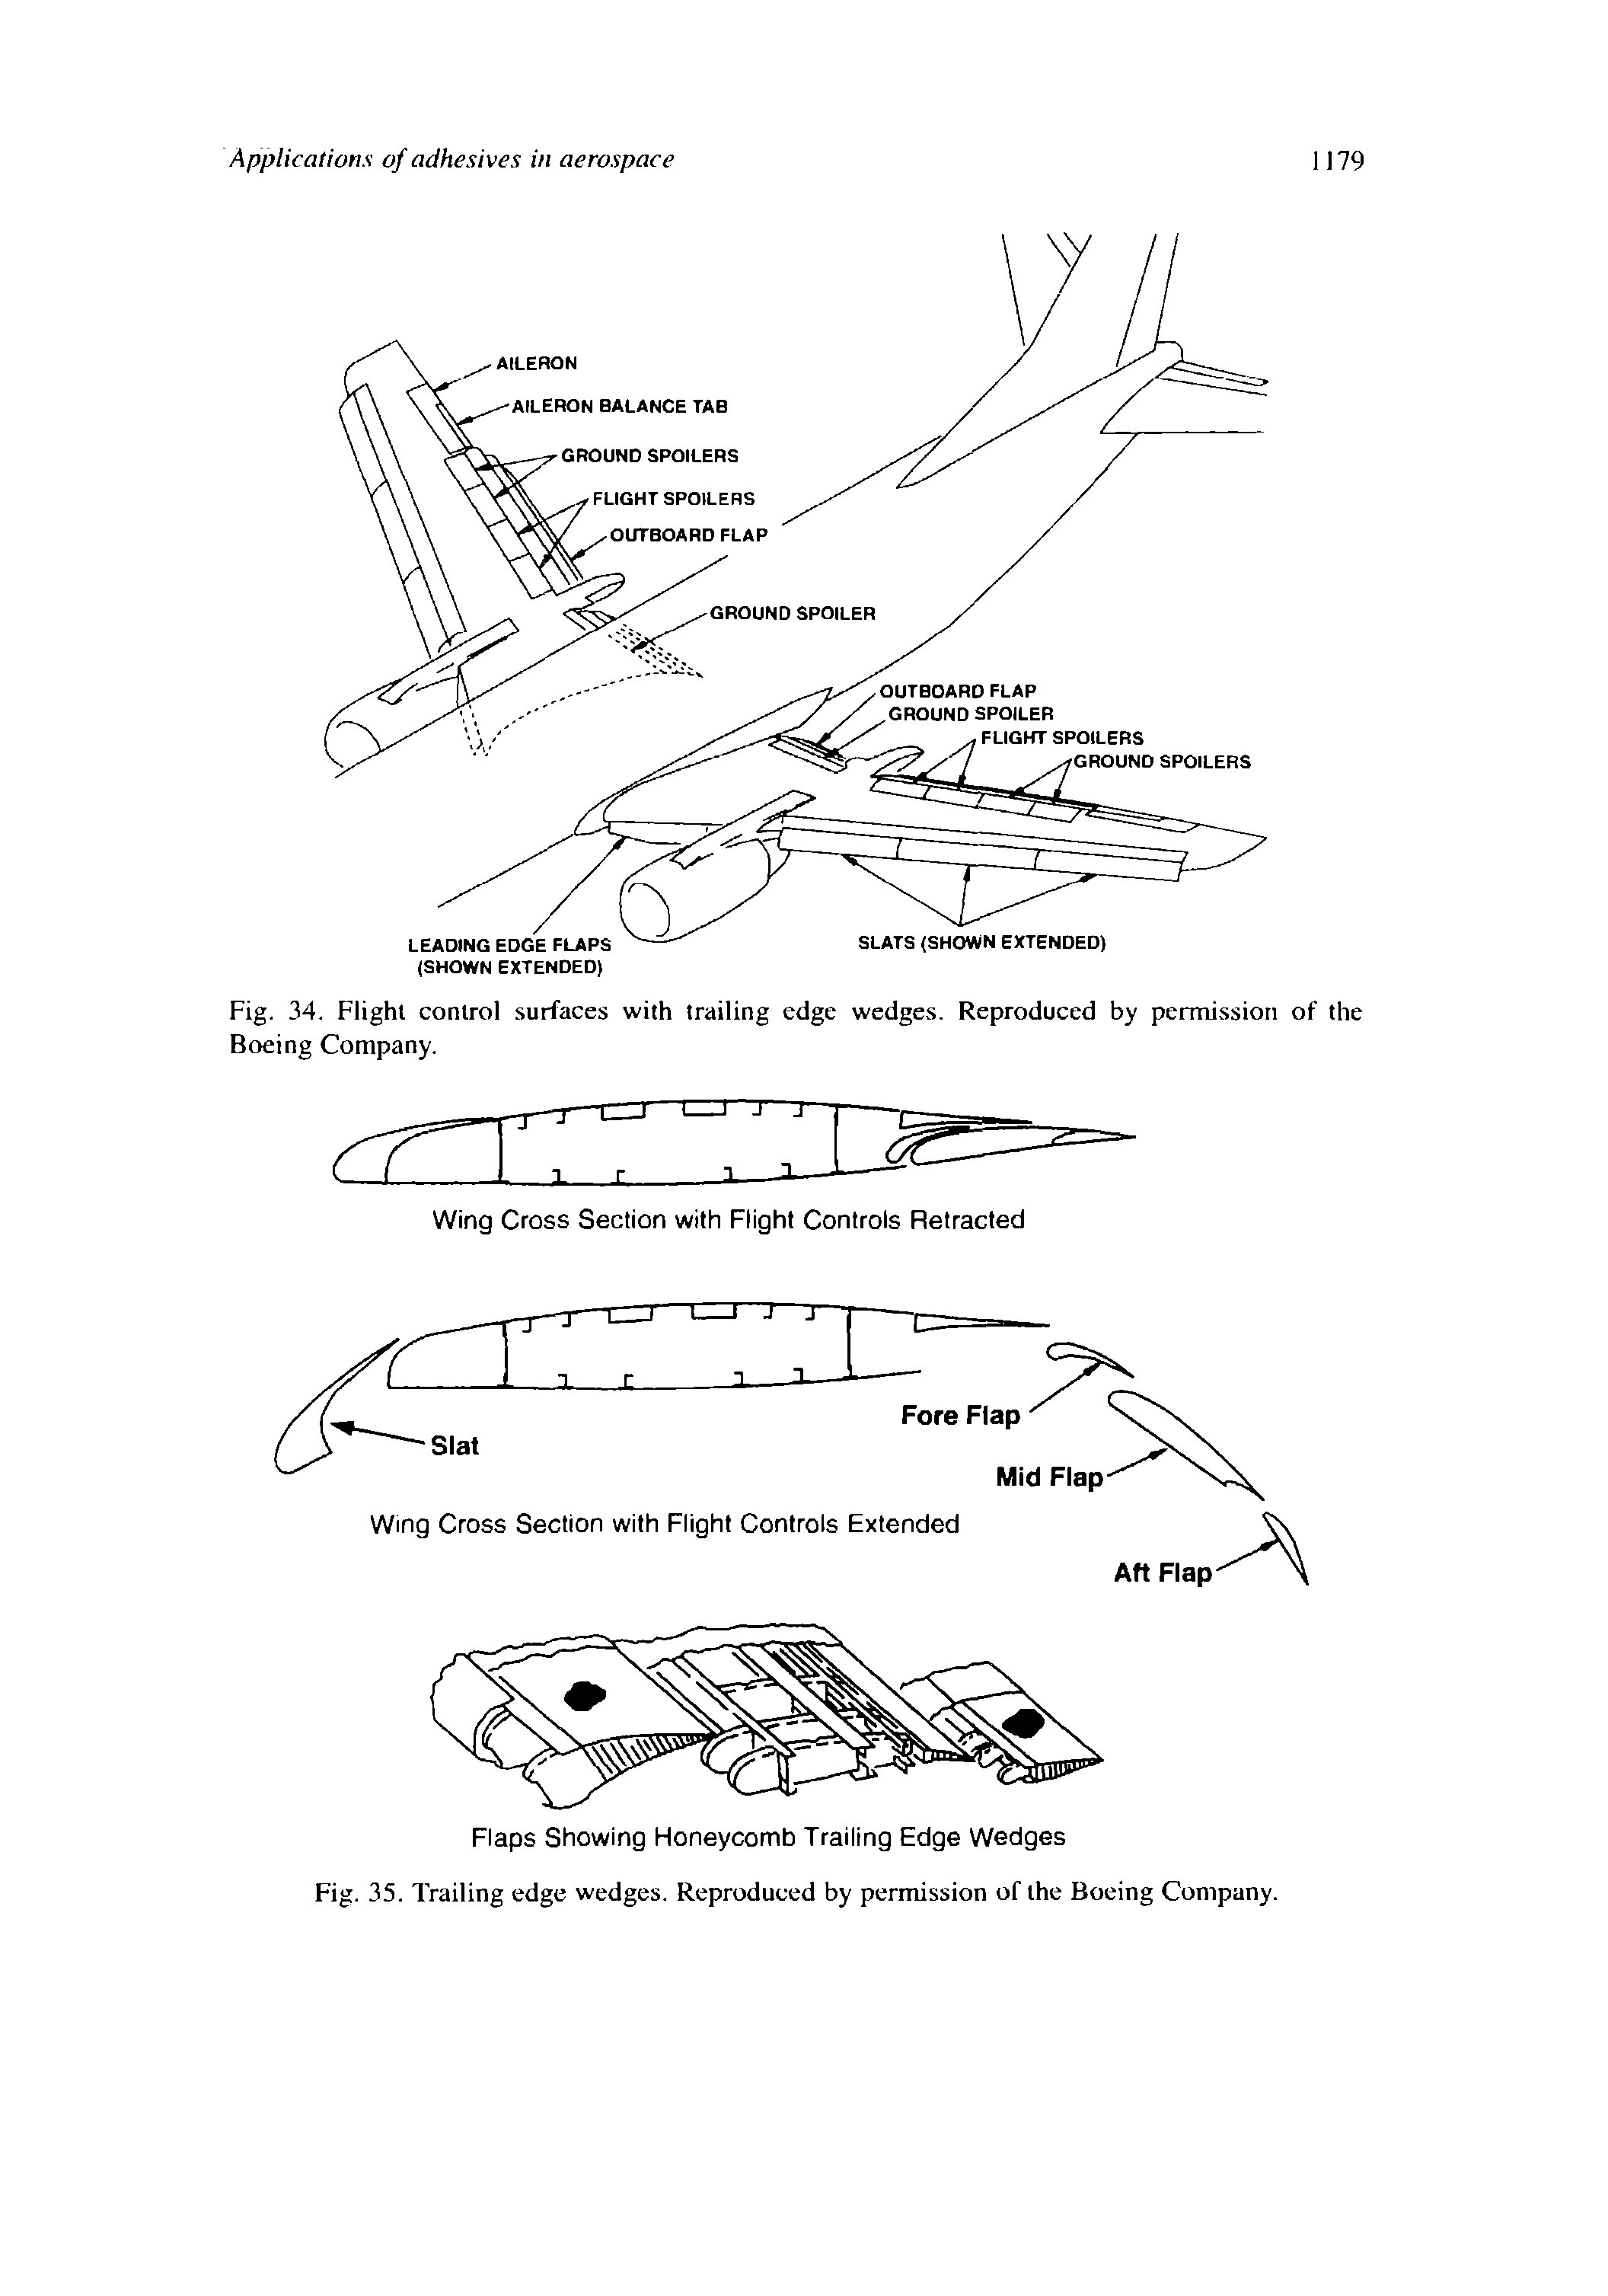 Fig. 34. Flight control surfaces with trailing edge wedges. Reproduced by permission of the Boeing Company.